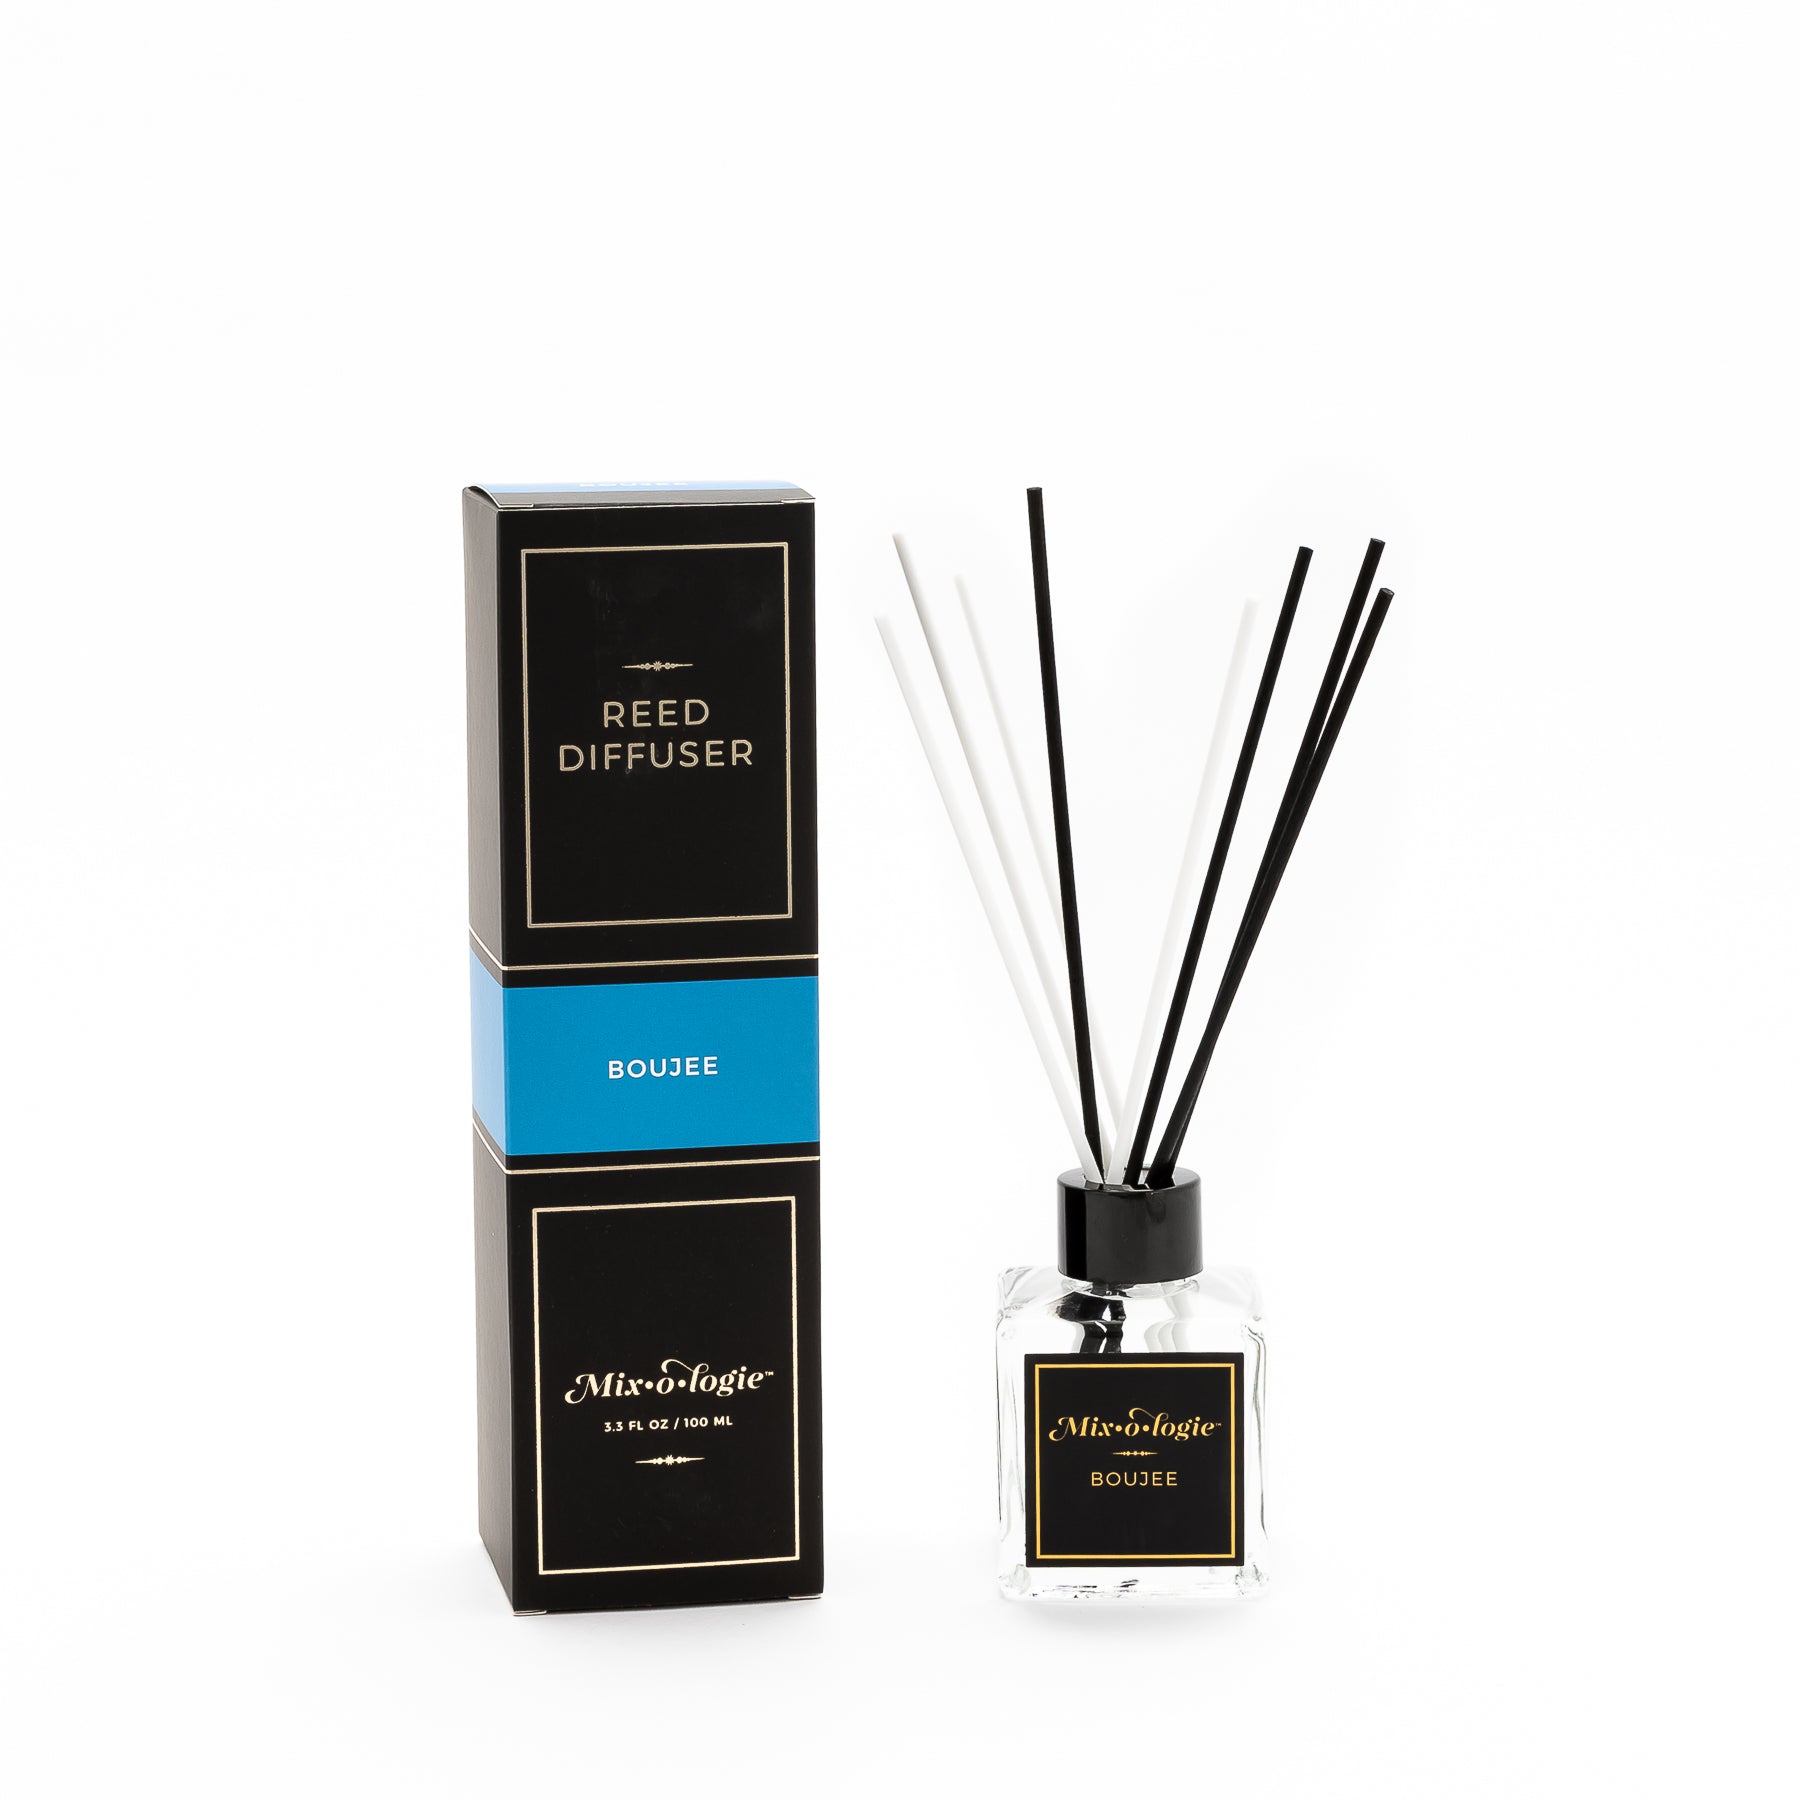 Boujee Reed Diffuser is a clear square glass container with black label that says Mixologie – Boujee. Has a black top and 4 white & 4 black reed sticks coming out of top, is 3.3 fl oz or 100 mL of clear scented liquid. Black rectangle package box with blue label. Box and diffuser are pictured with white background.